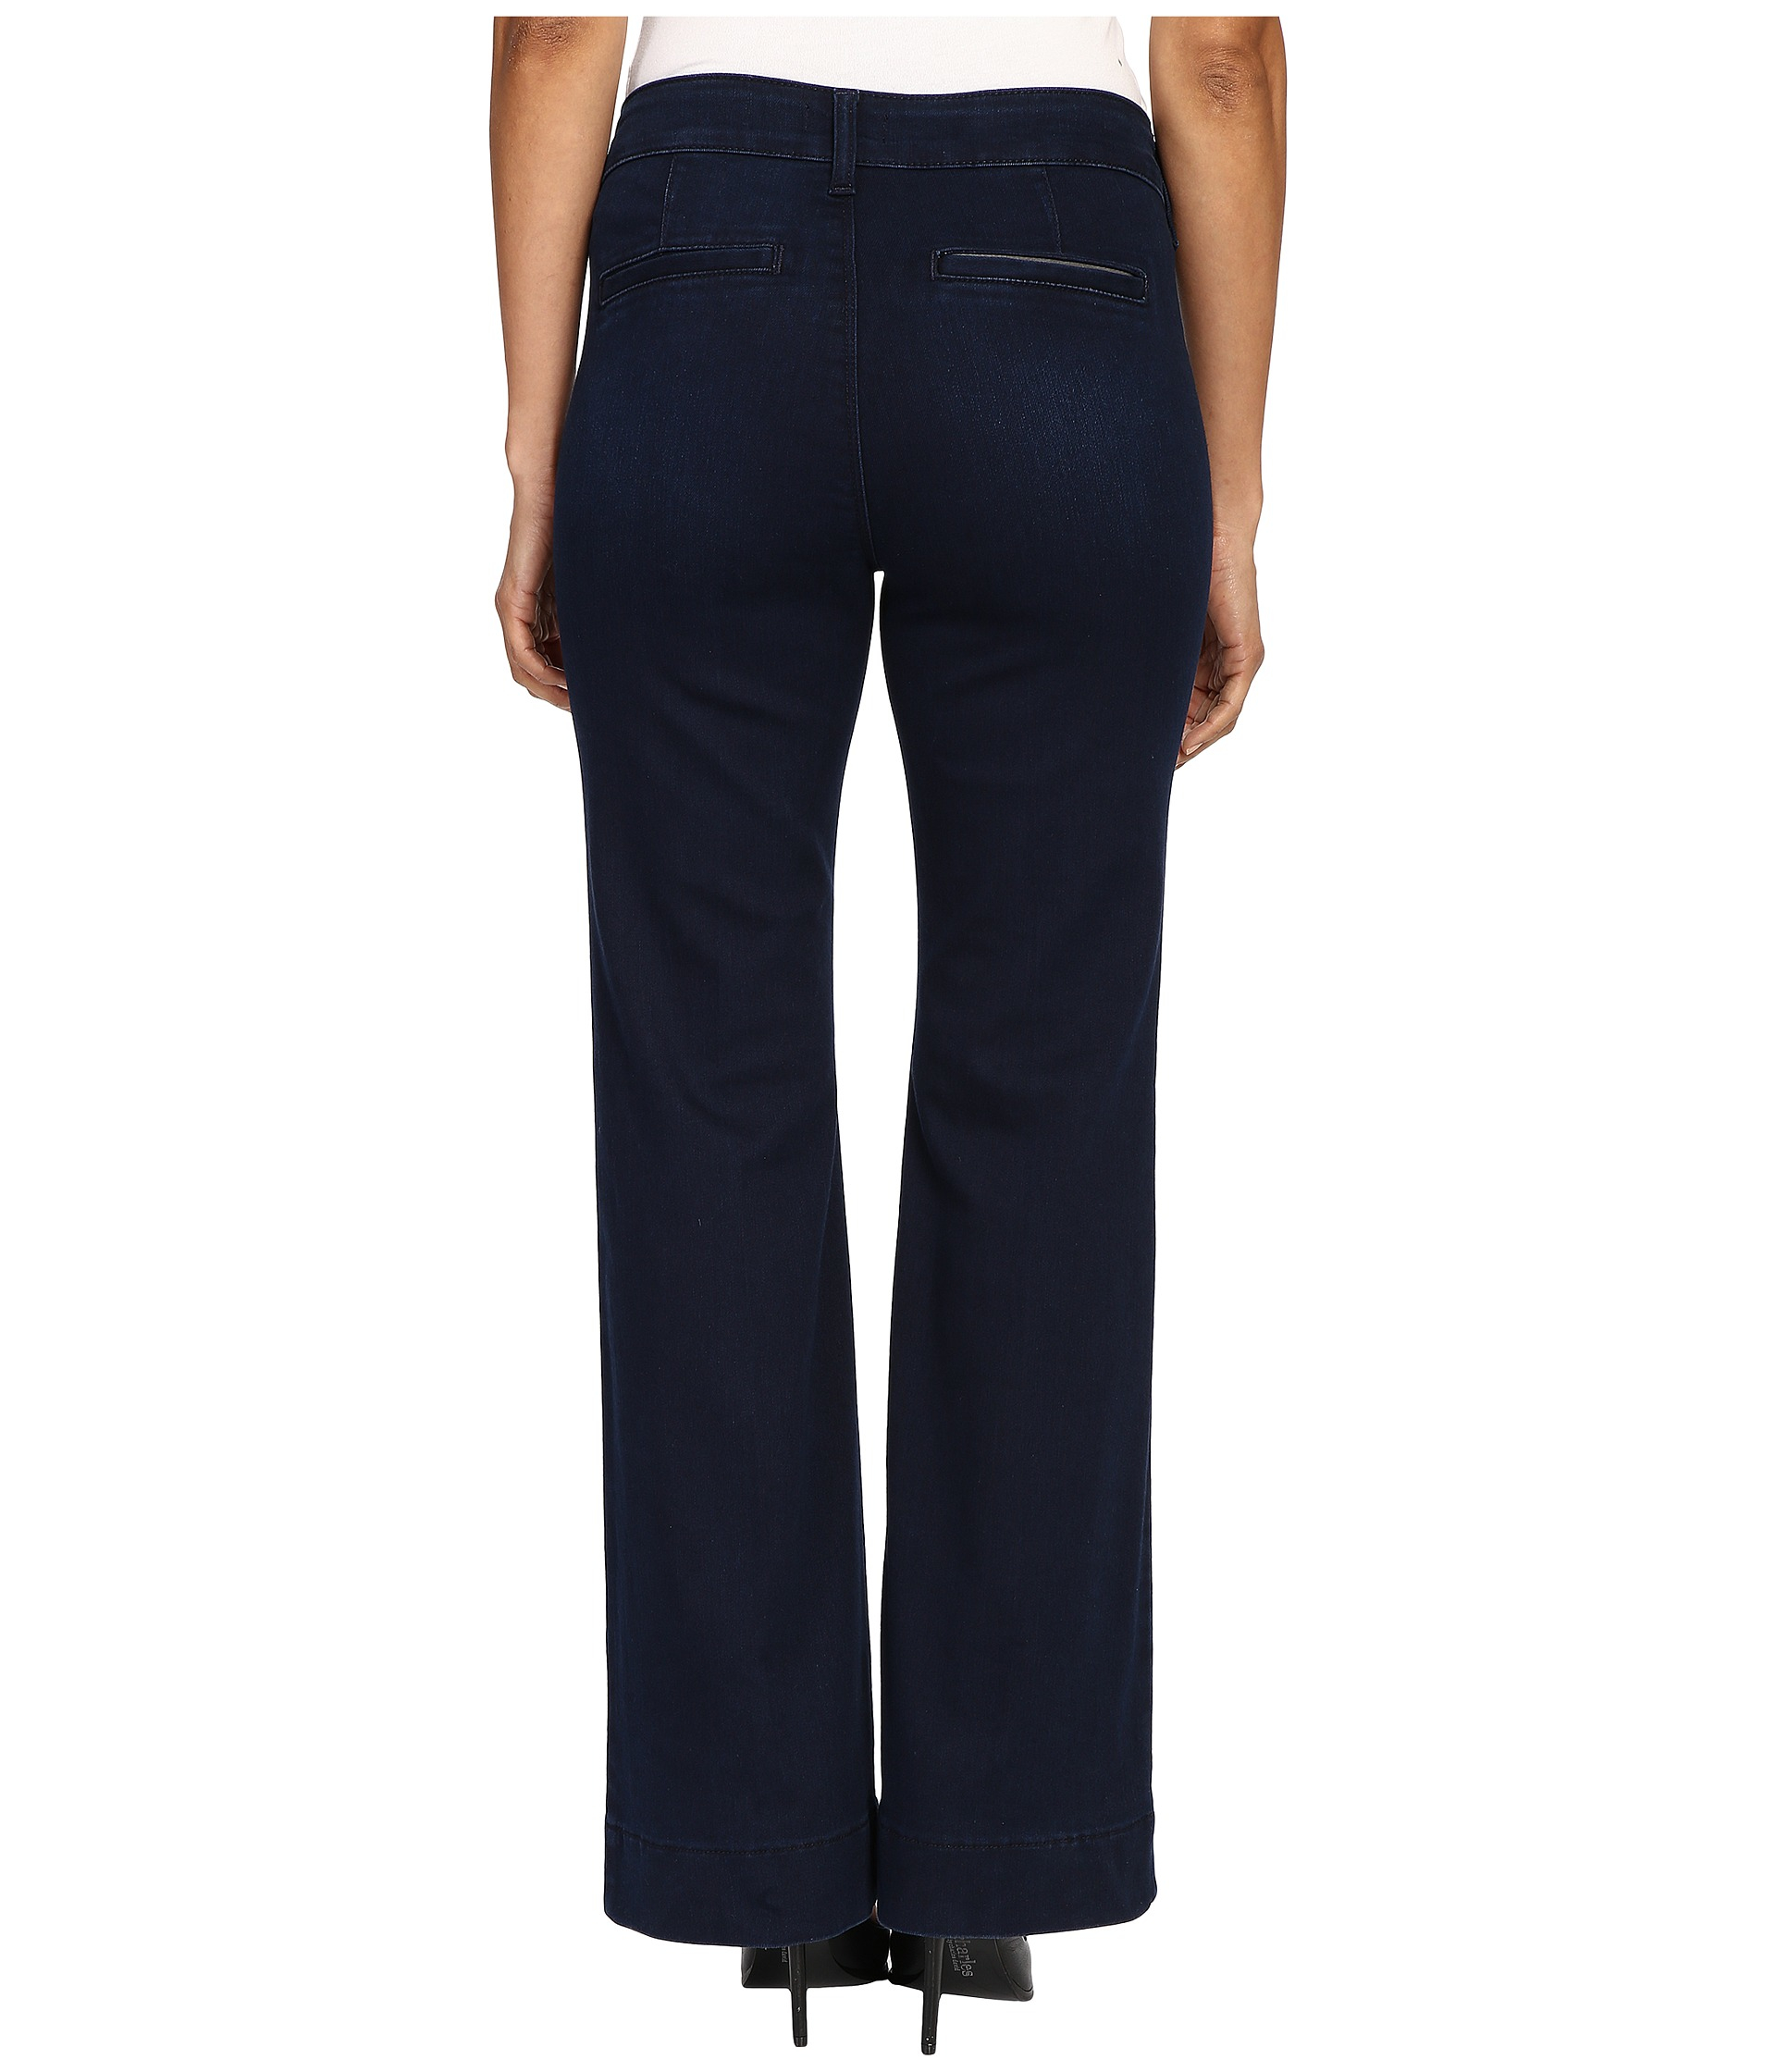 NYDJ Womens Collection Teresa Modern Trouser Jeans in Future Fit